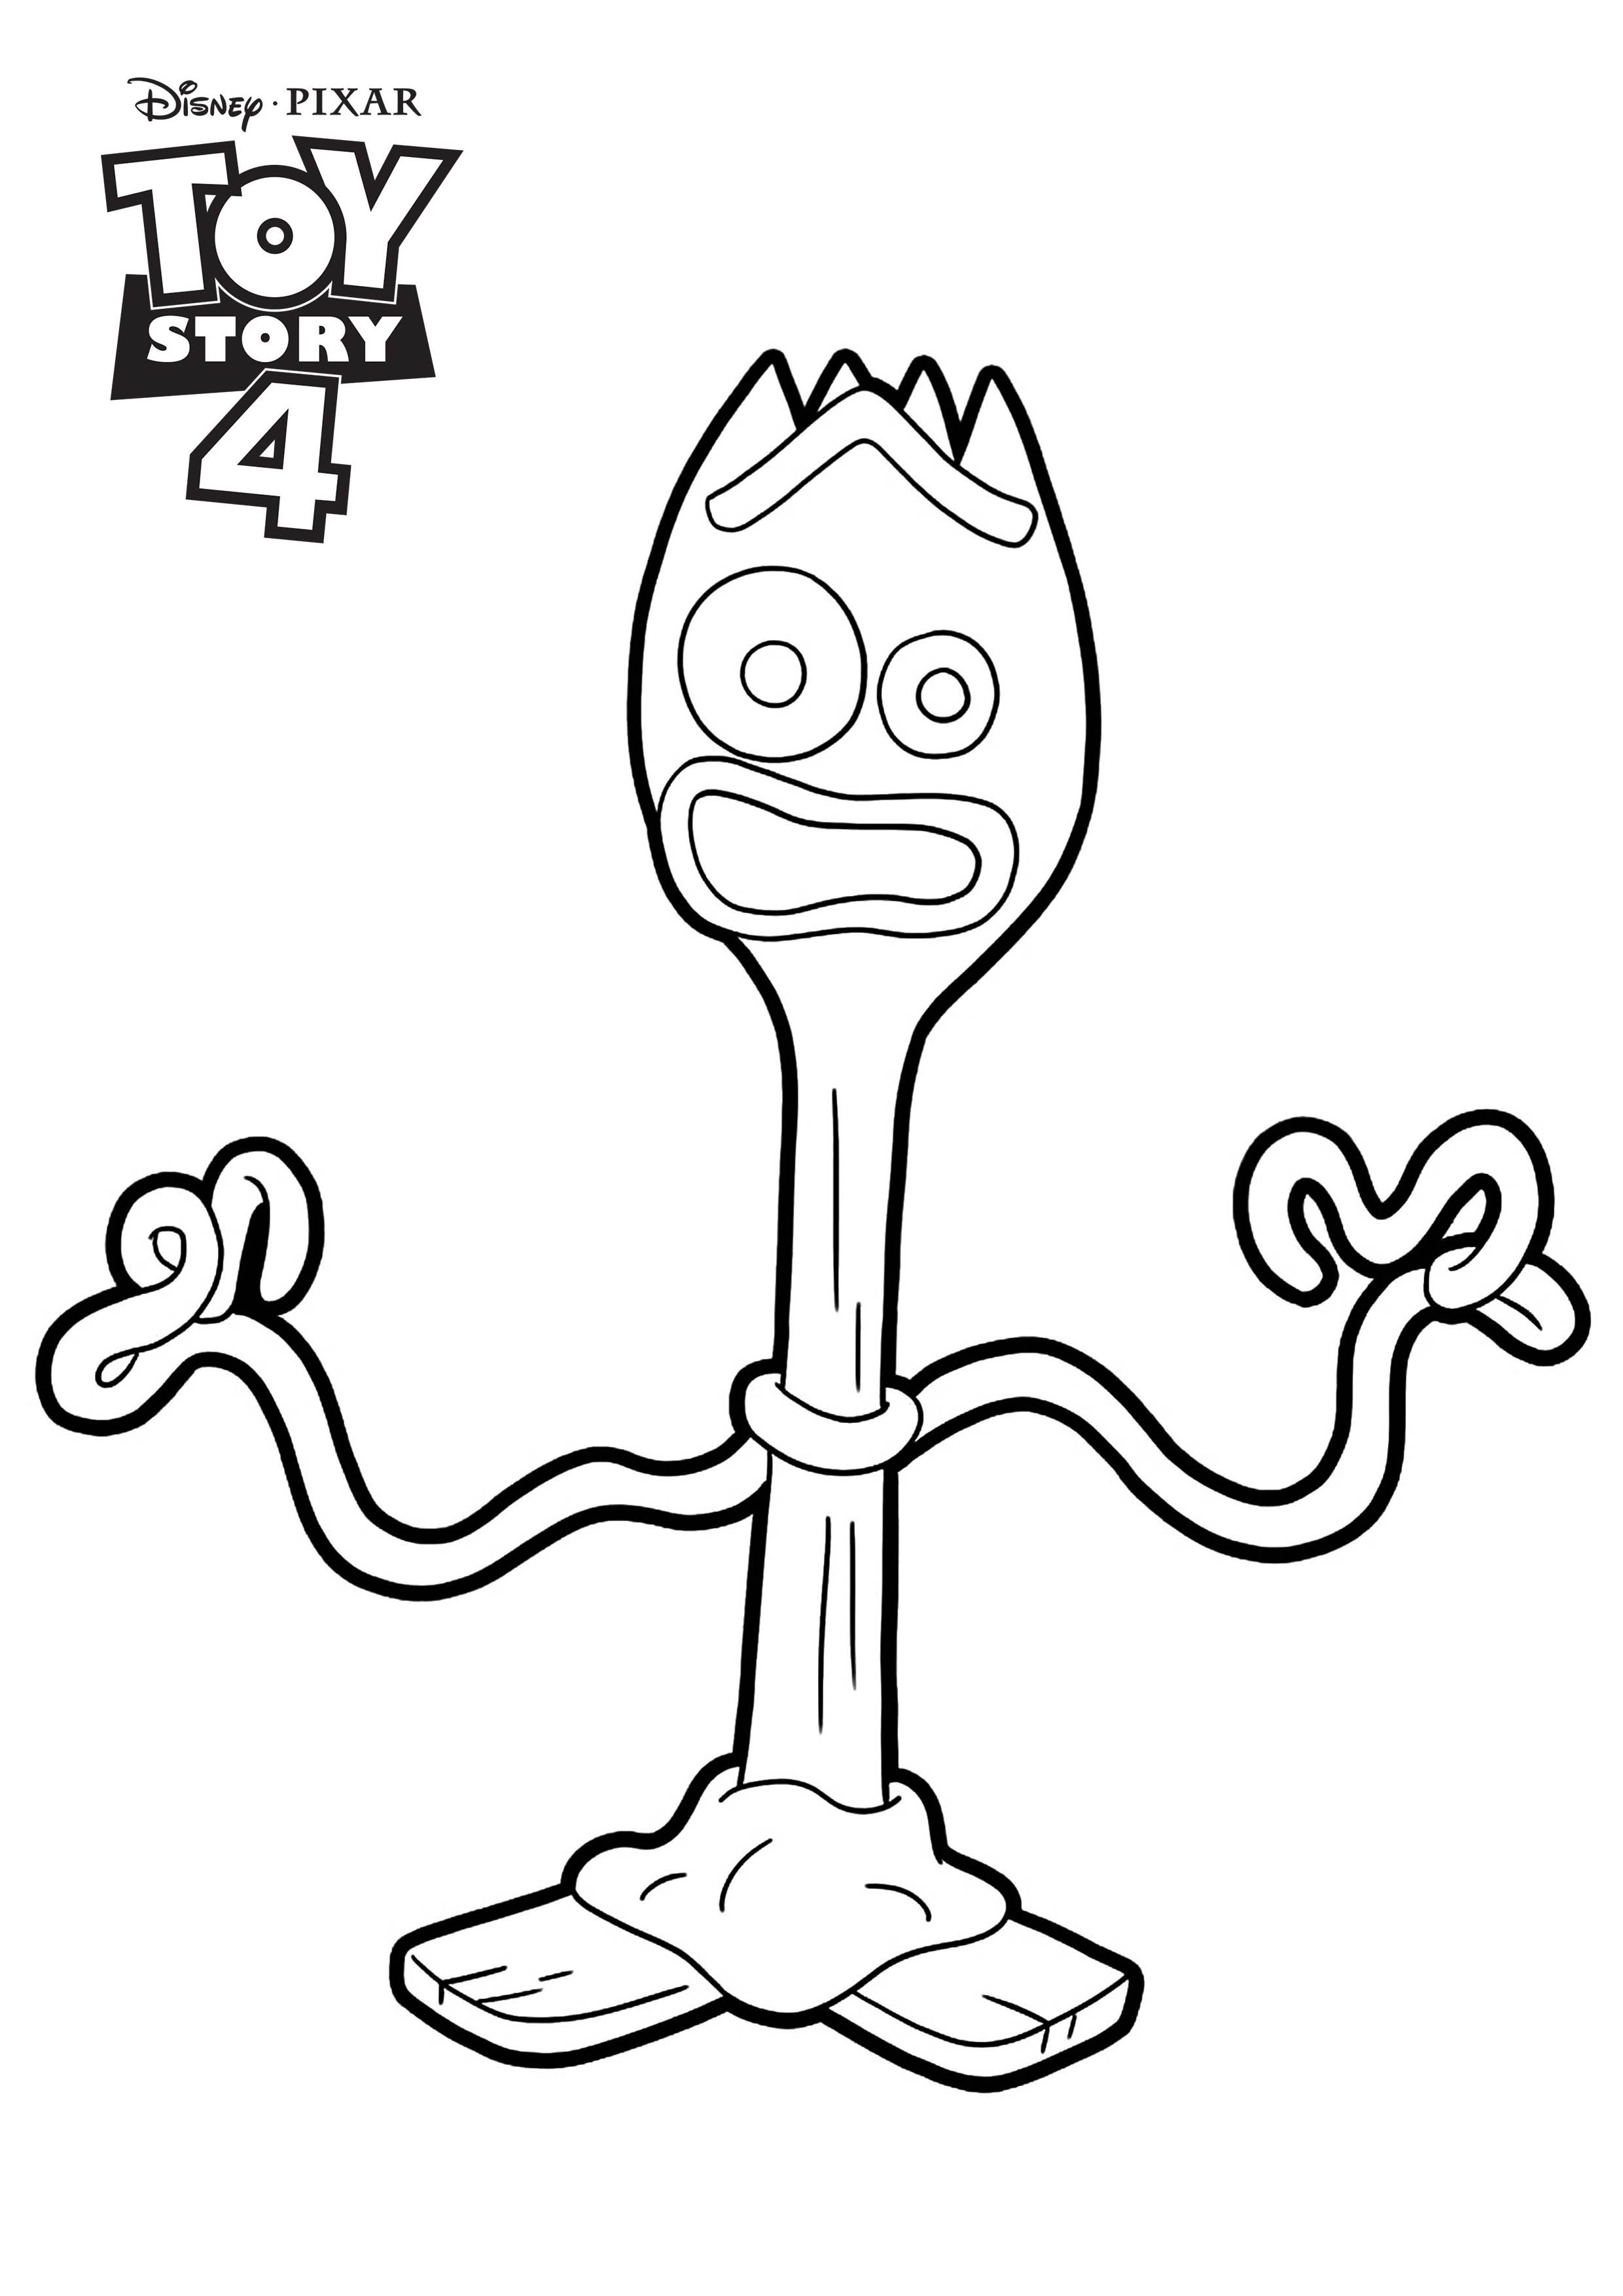 forky-toy-story-4-coloring-page-disney-pixar-toy-story-4-kids